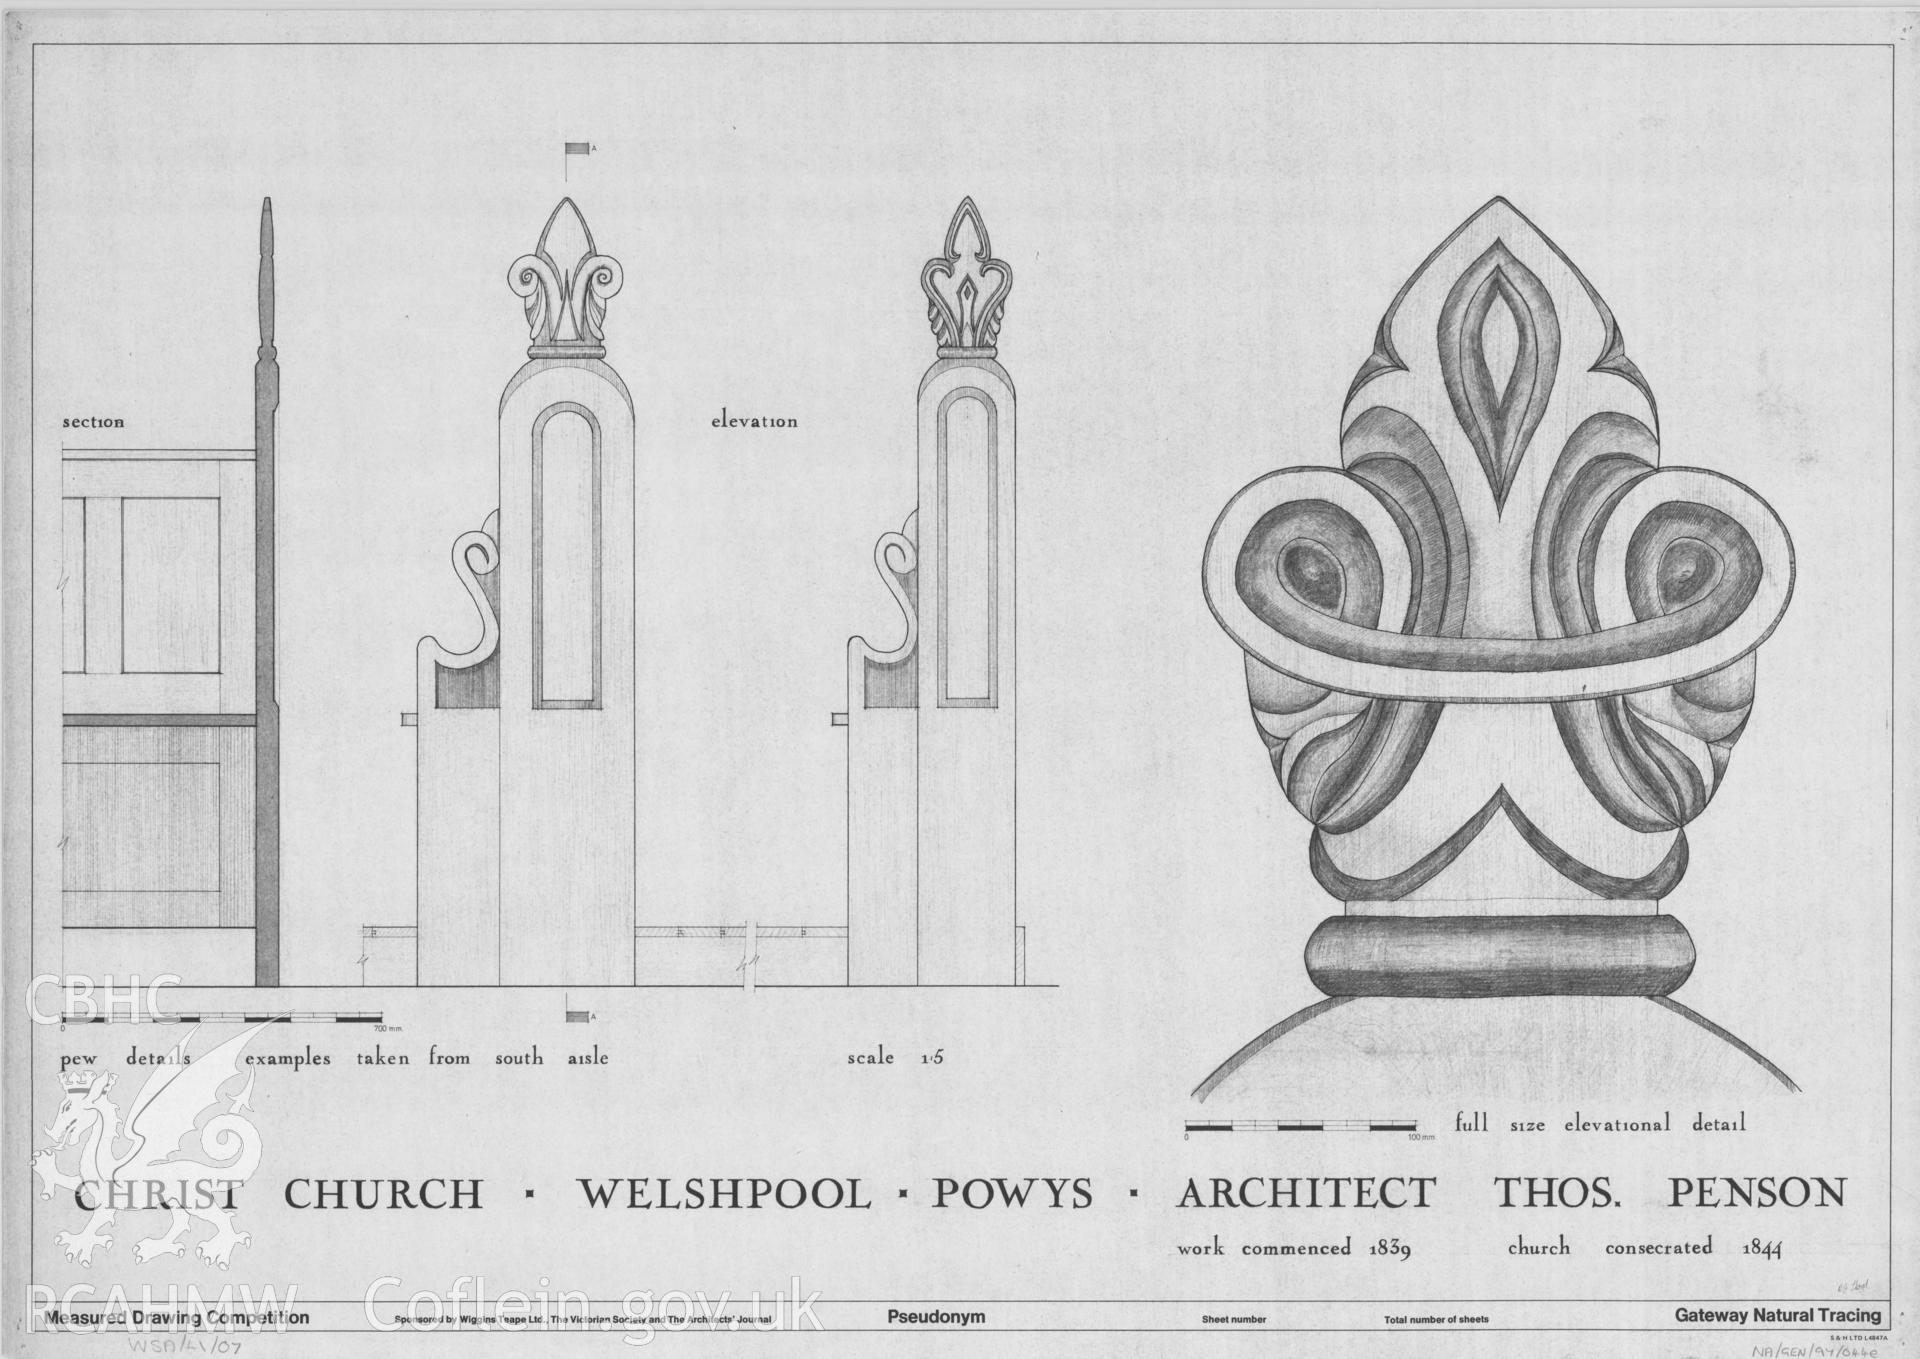 Measured drawing showing detail of pews at Christ Church, Welshpool, produced by D. G. Lloyd, I. Rose and G. Usherwood, 1978